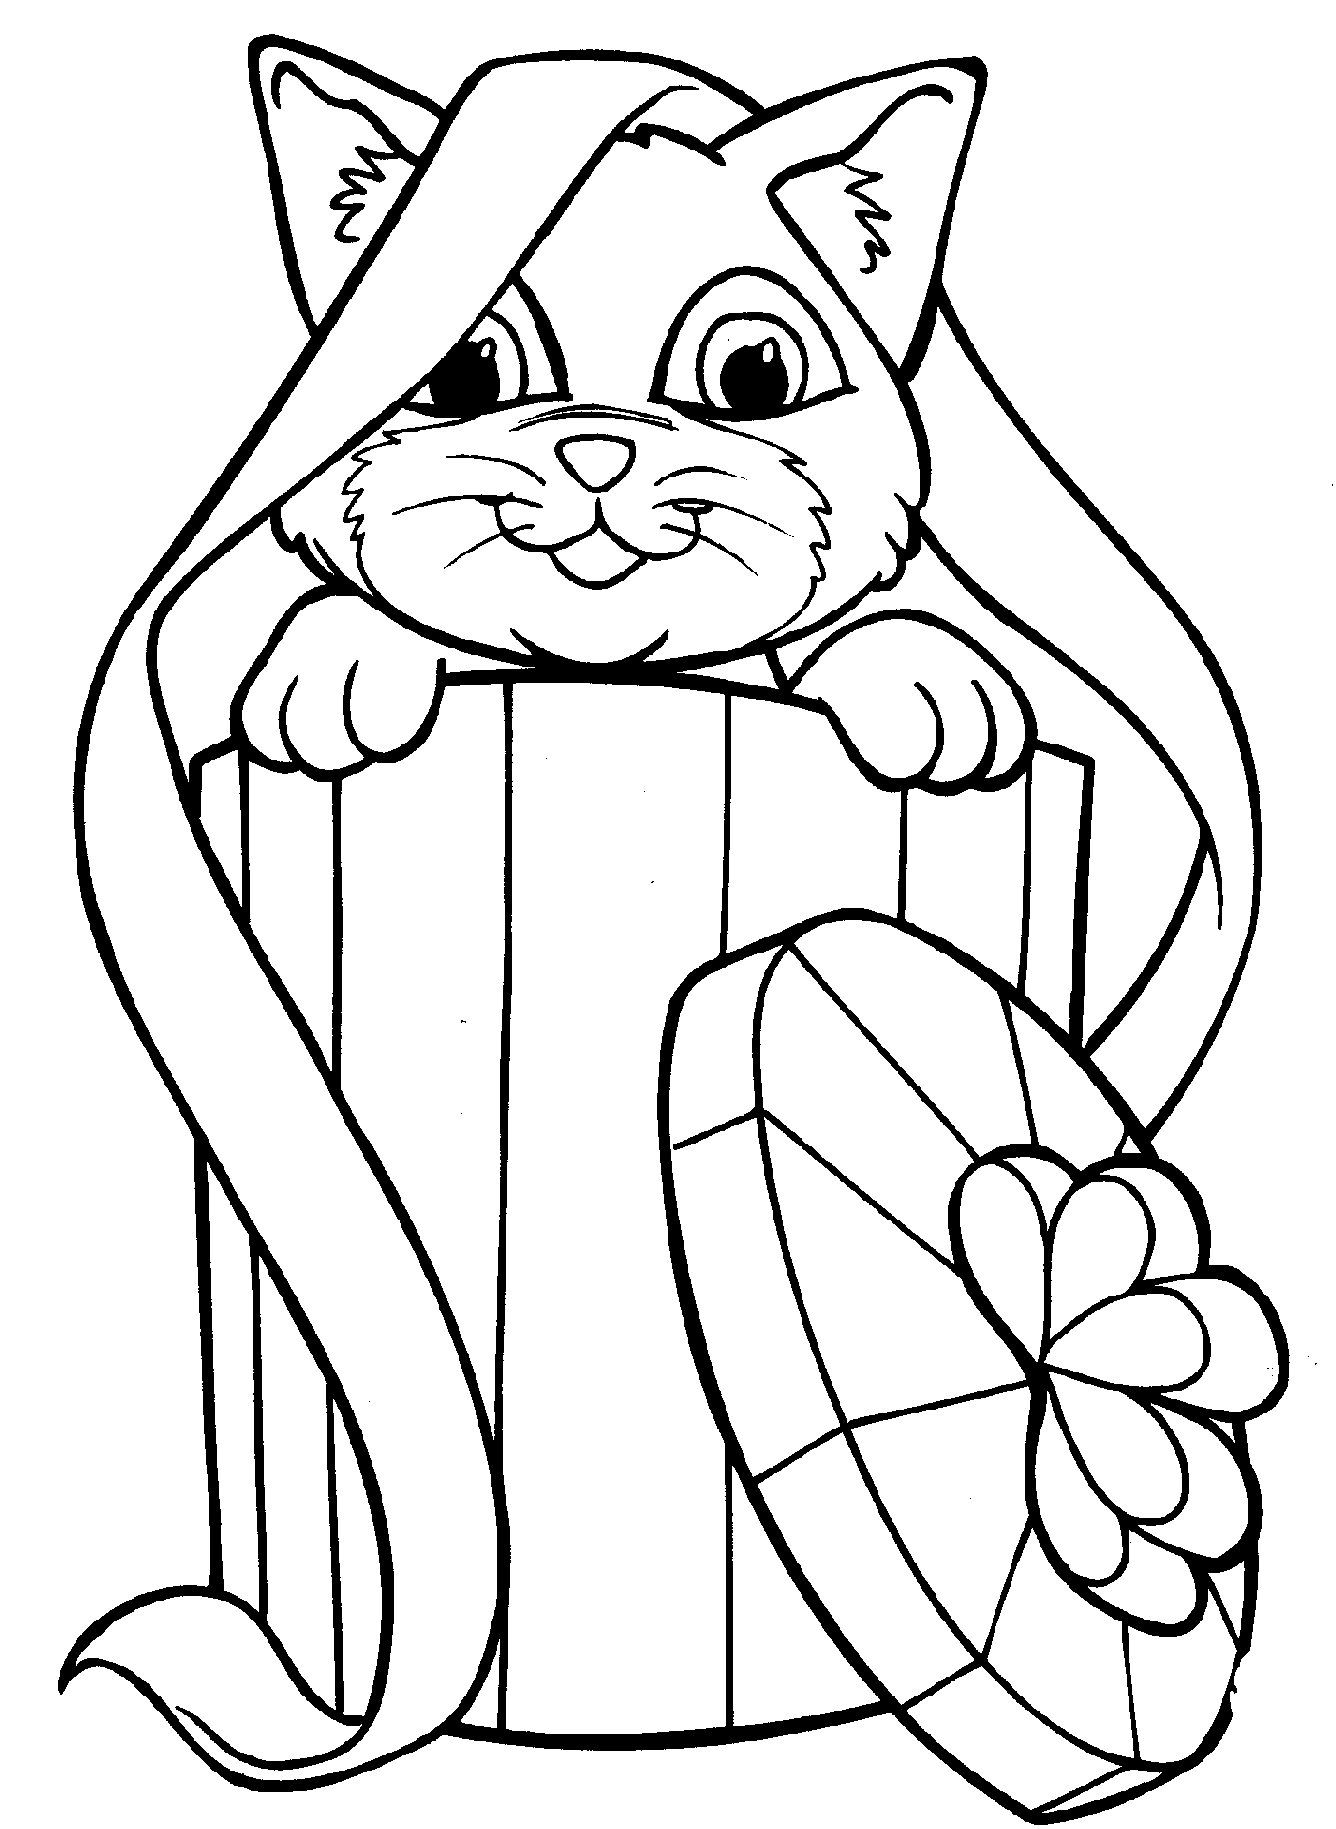 kitten coloring free printable kitten coloring pages for kids best kitten coloring 